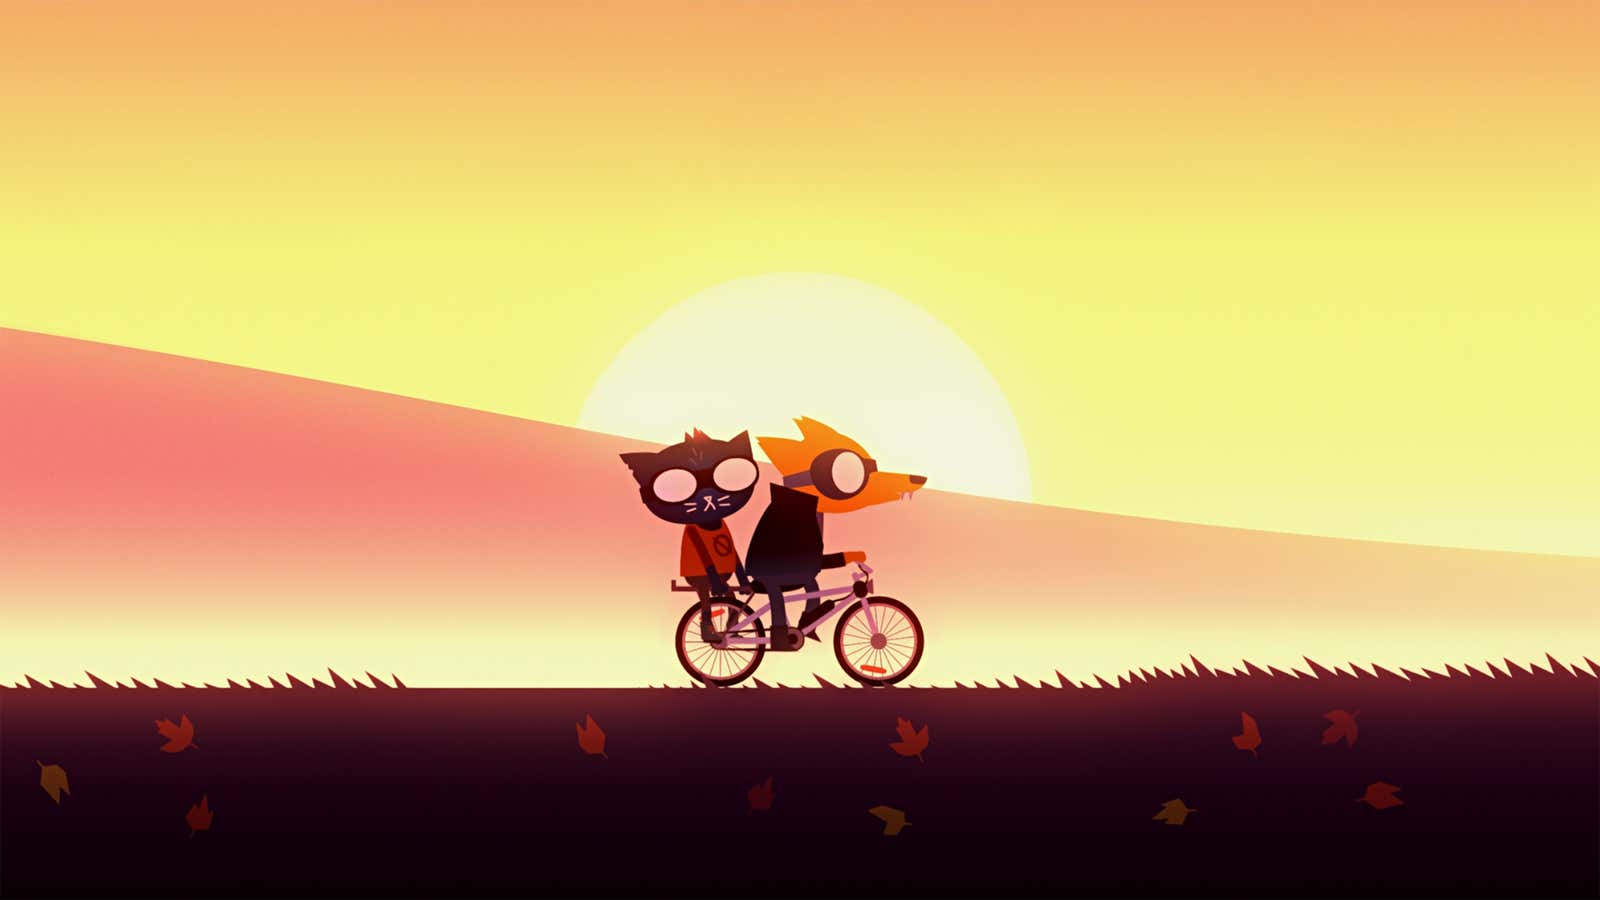 Night in the Woods, an indie video game by Infinite Fall, is currently on sale in Steam.